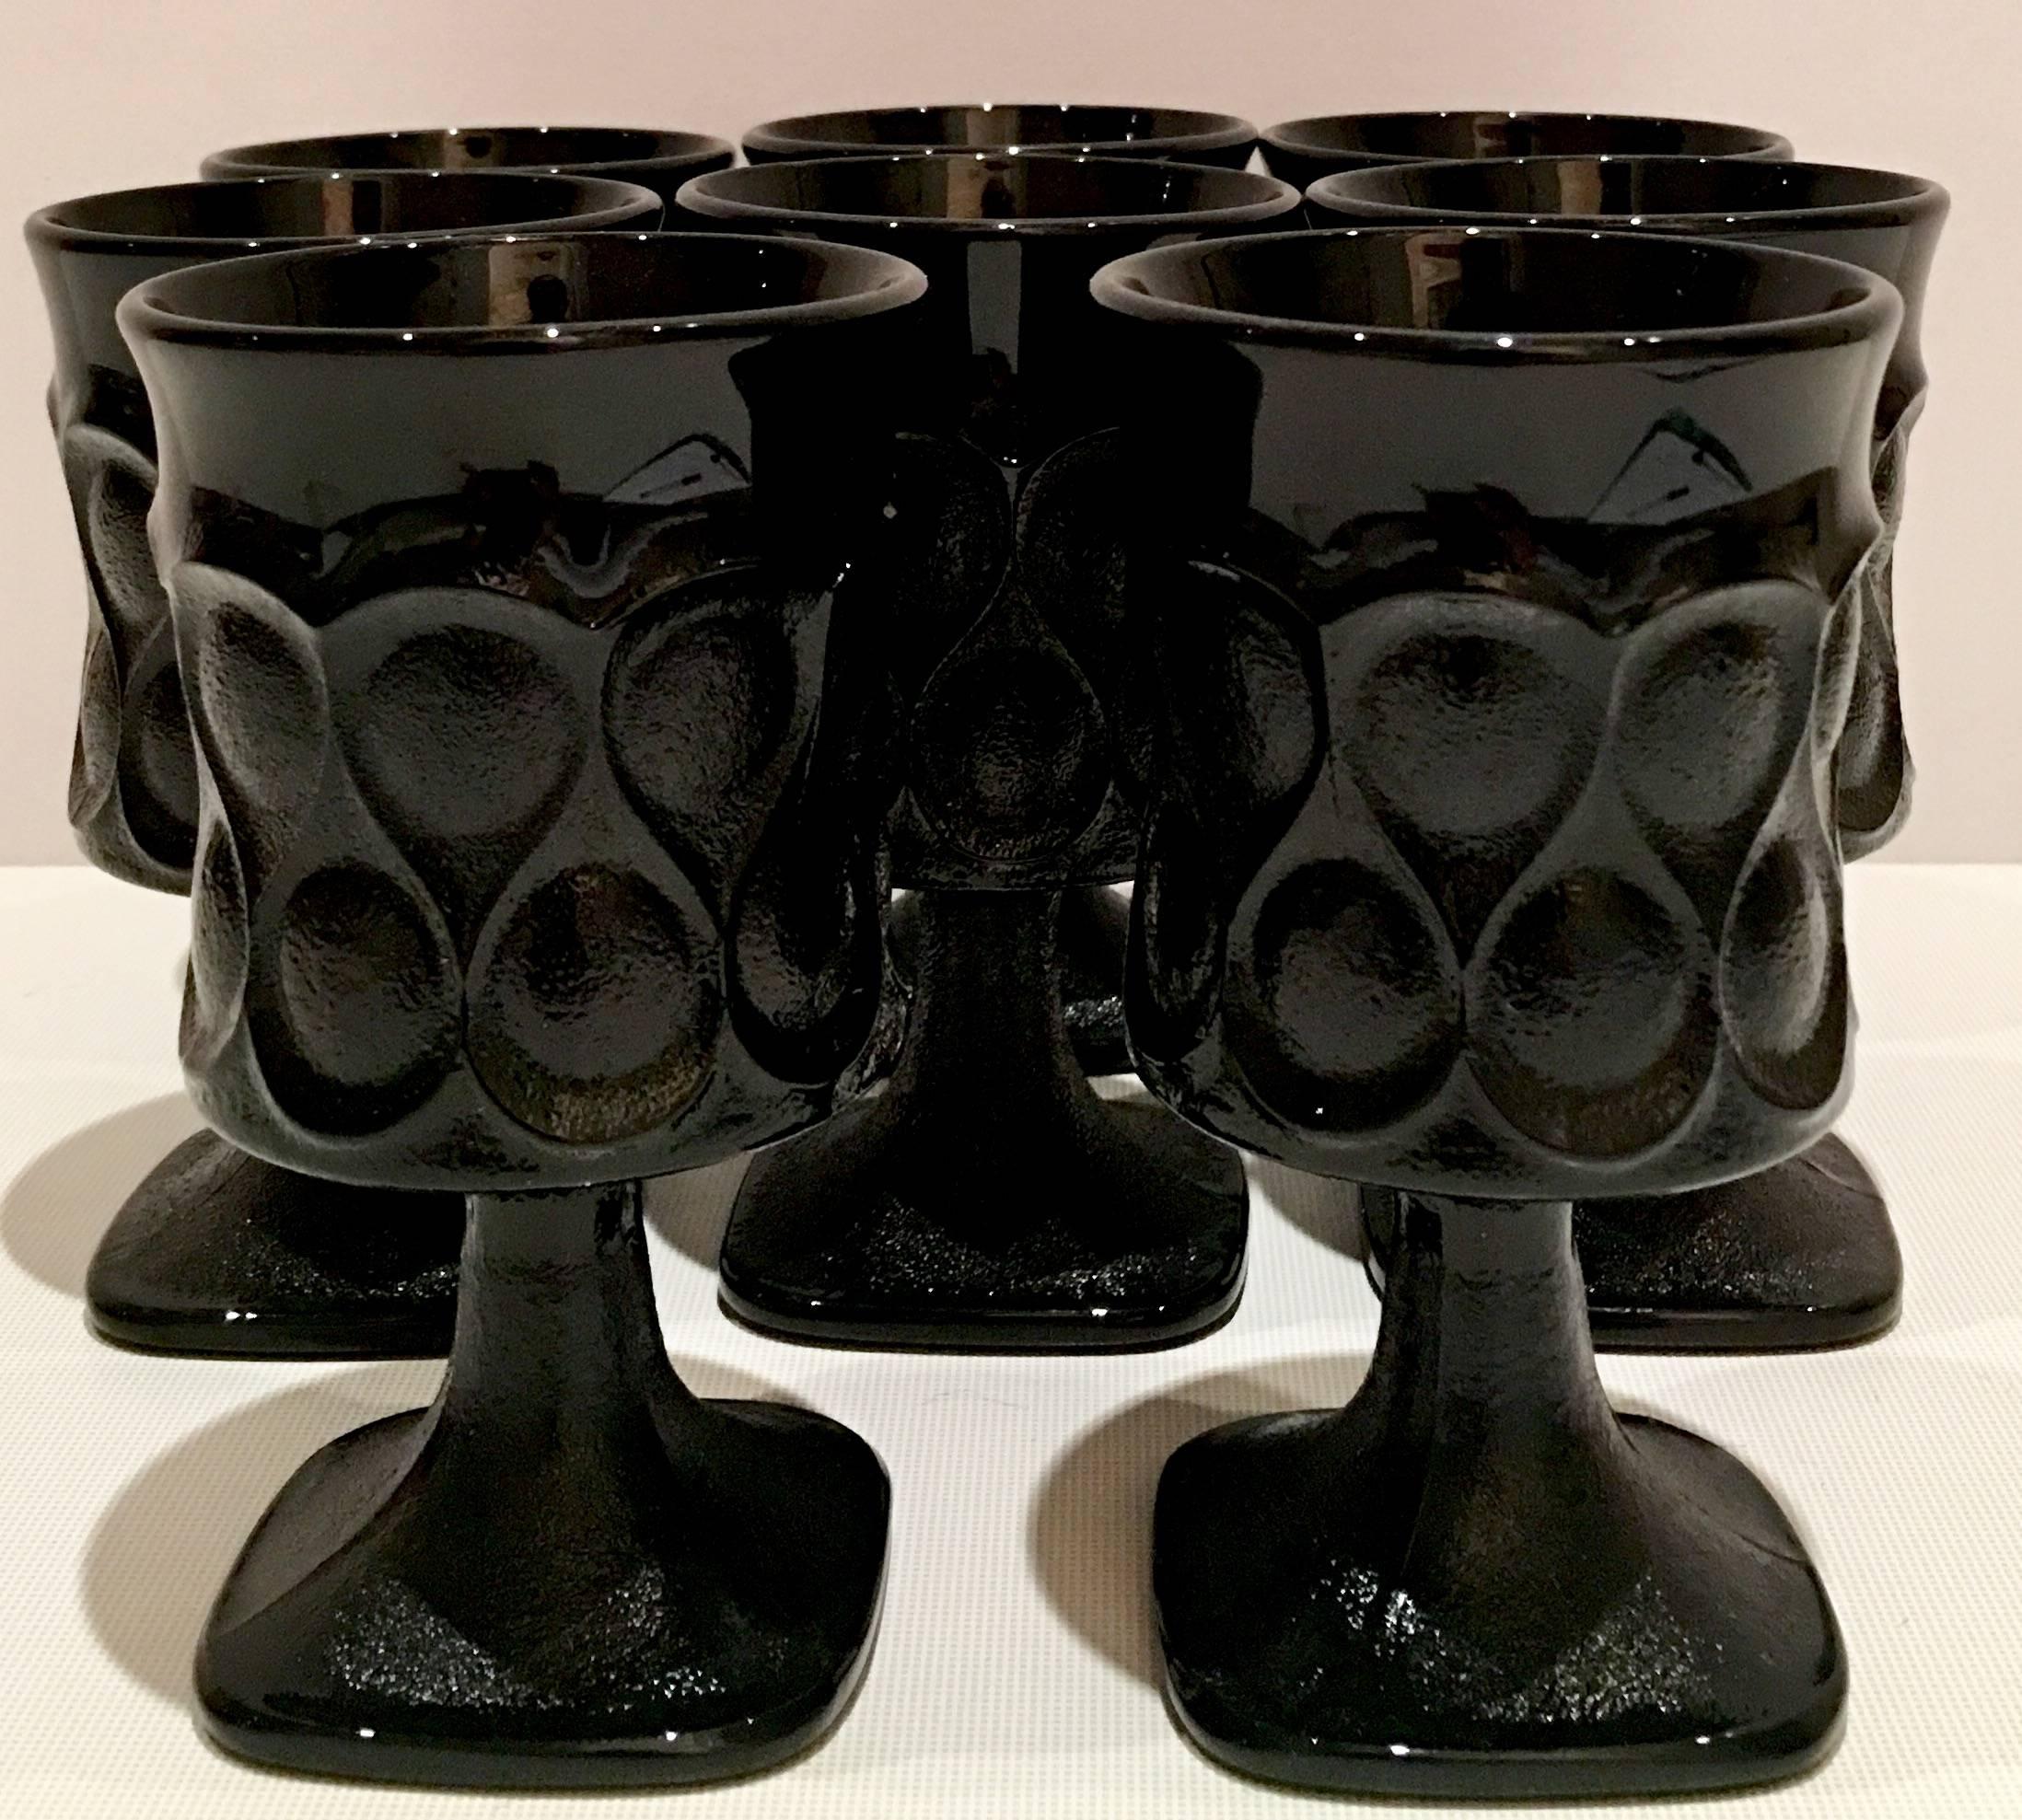 1970s Gothic style textured pressed pattern glass footed stem drink goblets, set of sixteen pieces. Pattern features a textured 